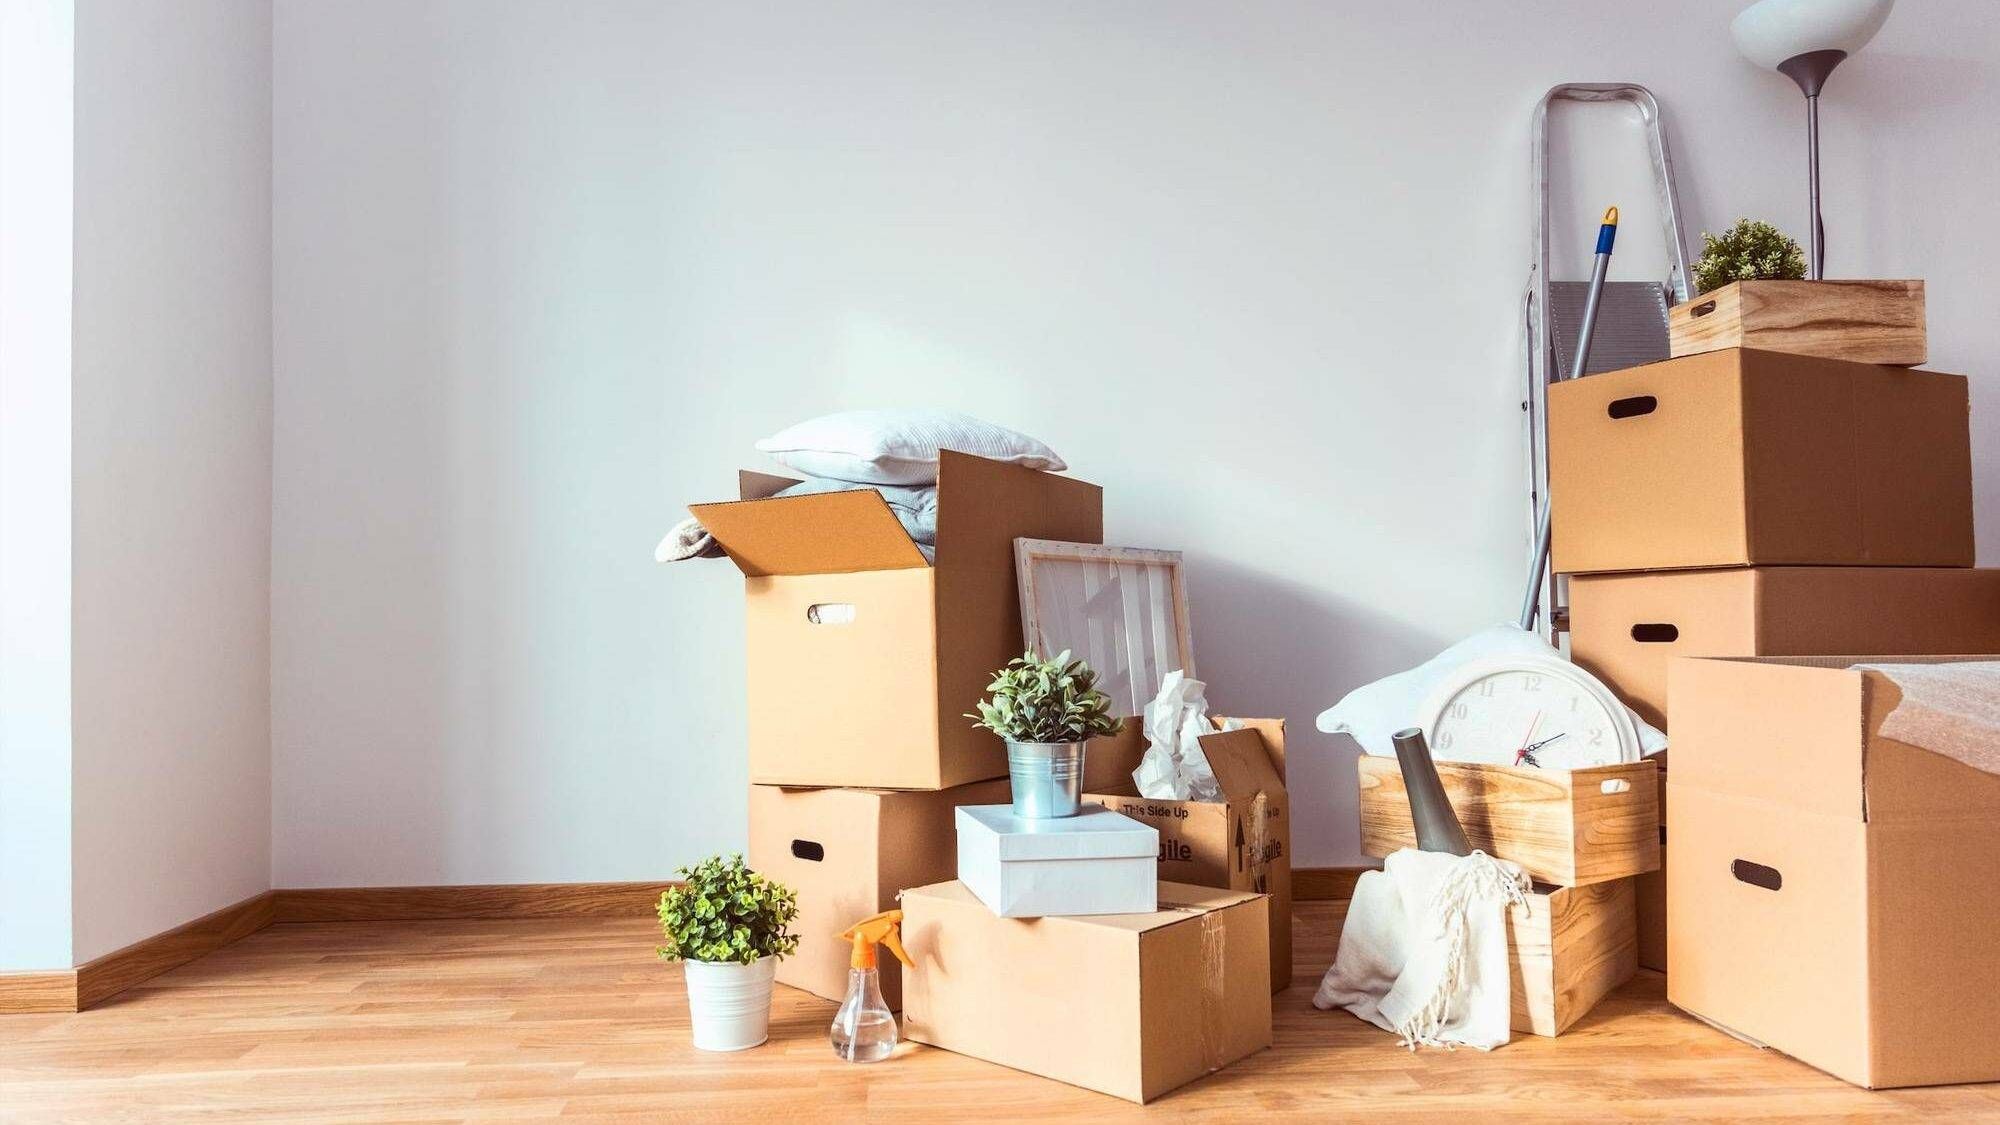 Photograph of moving boxes, household items, and cleaning supplies on the wooden floor of an apartment. Moving, moved, Rewire, PBS